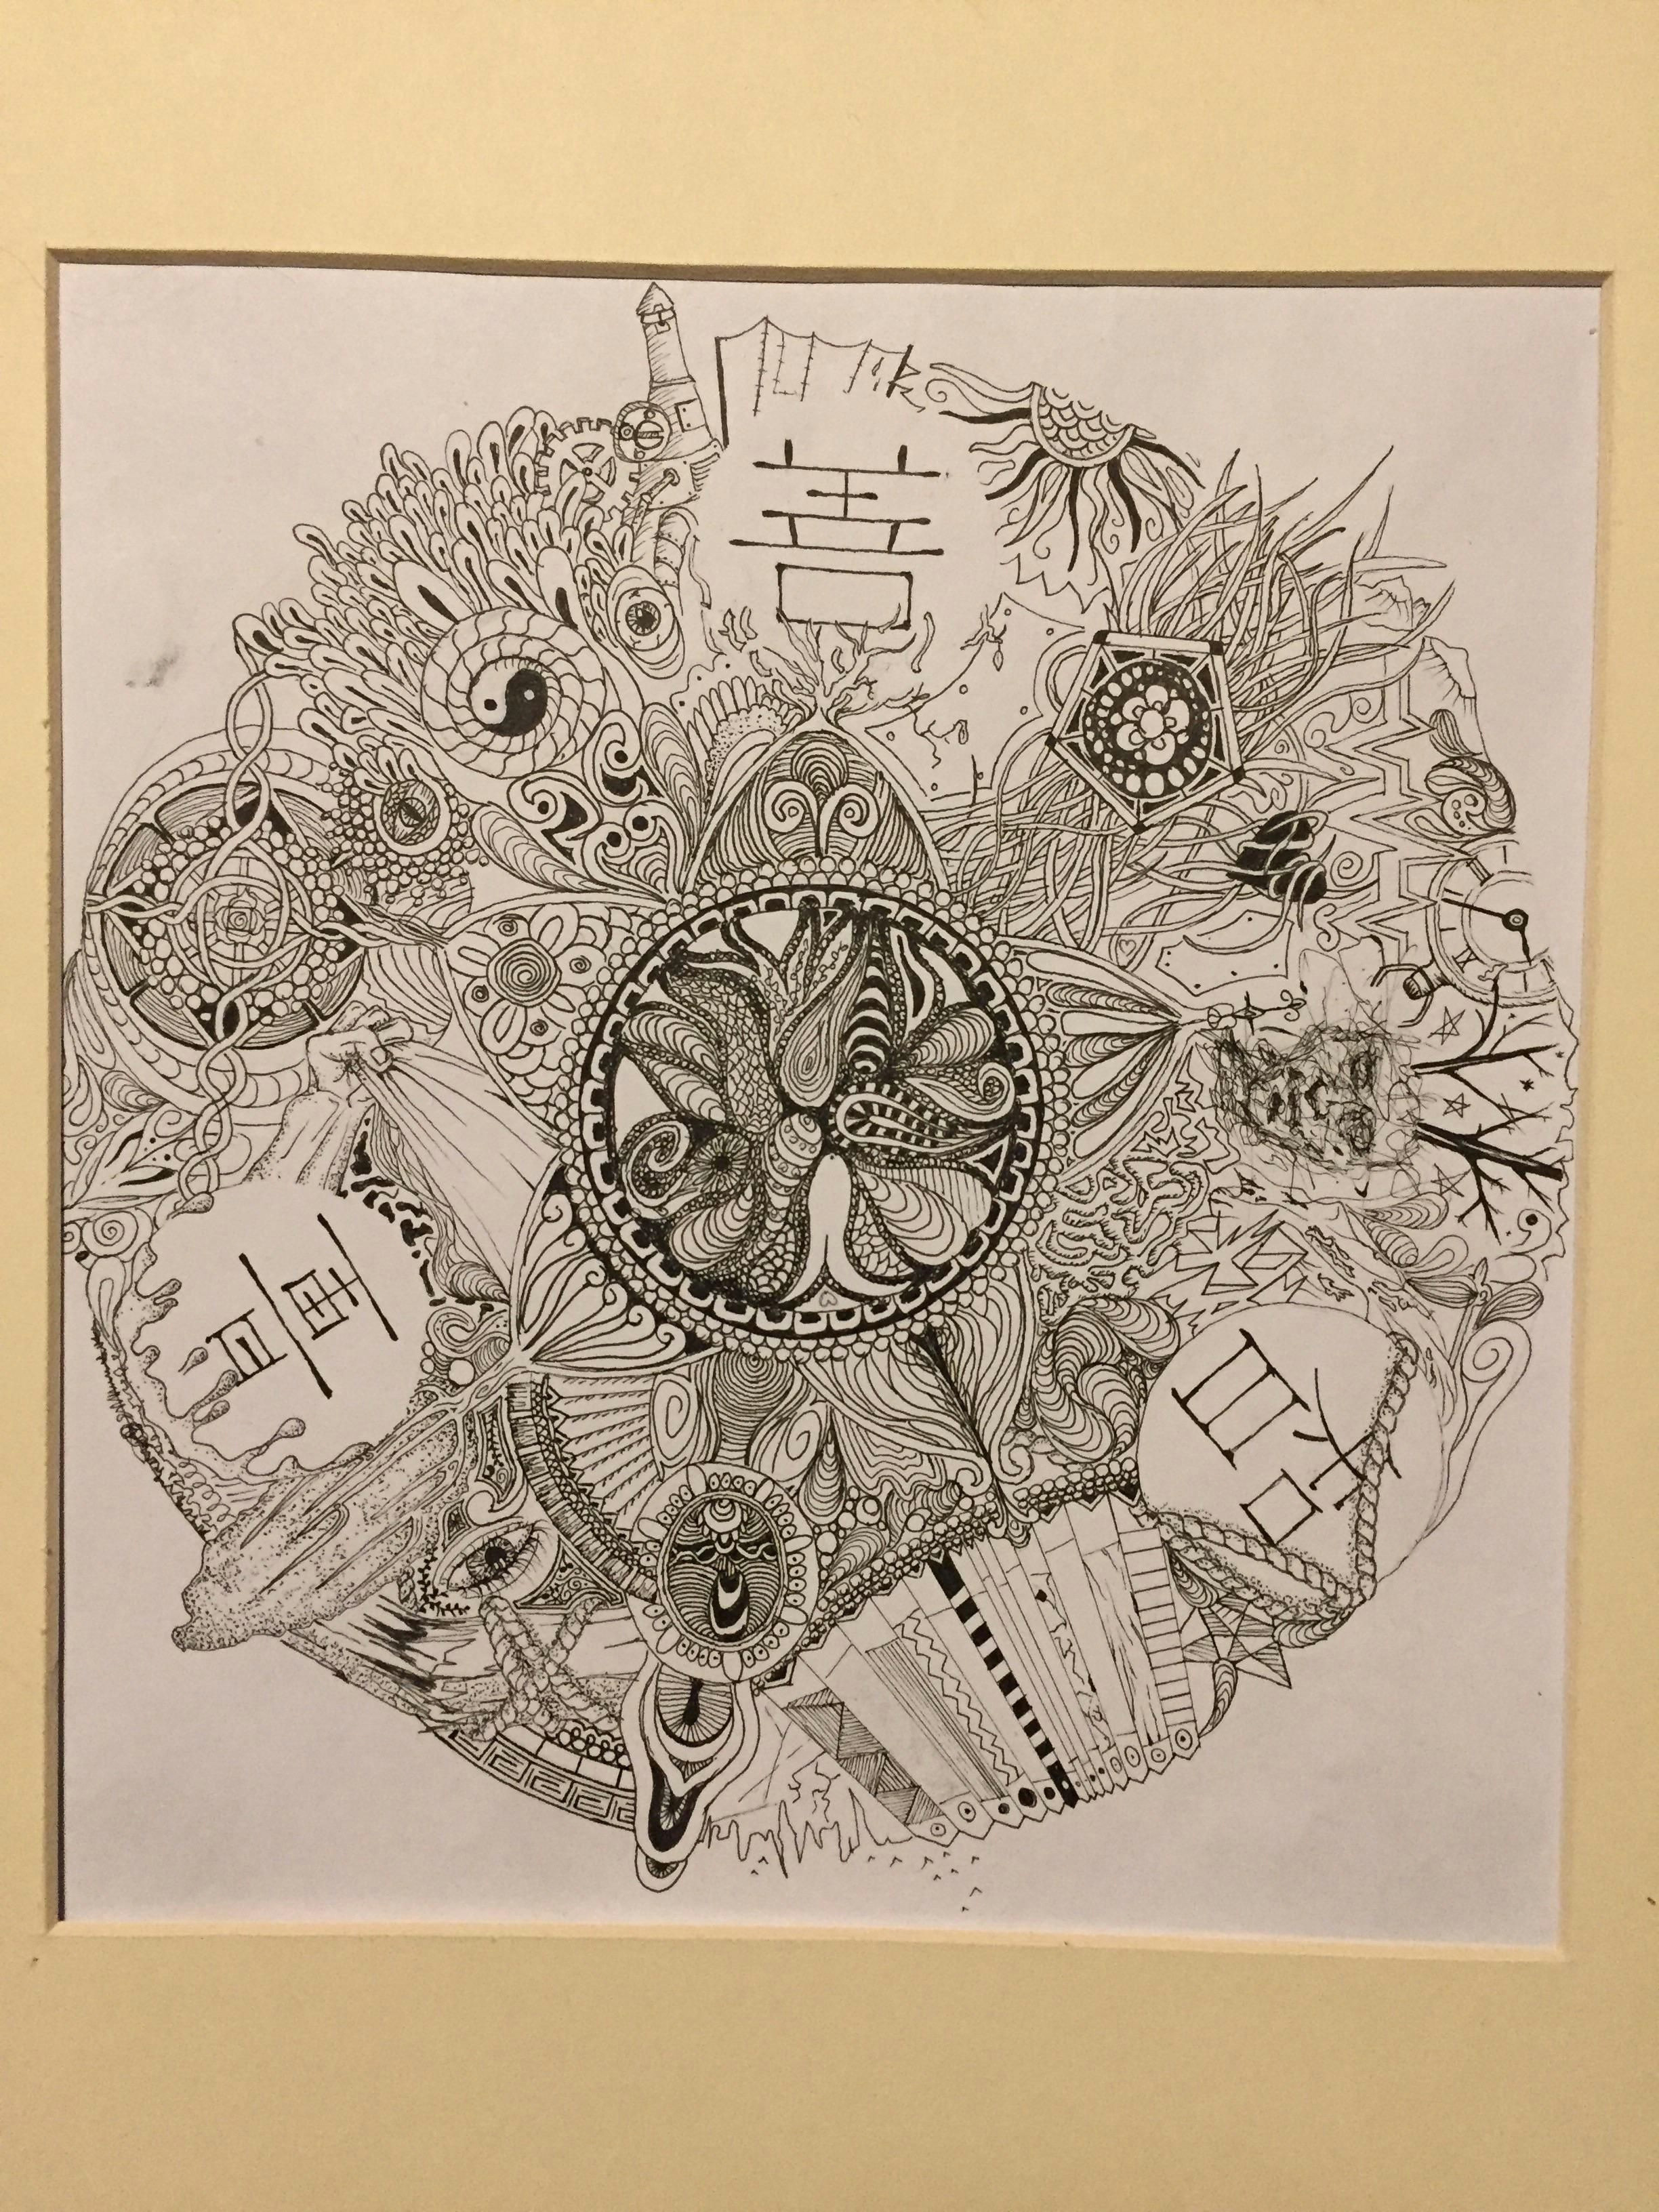 Drawing Ideas Reddit This is My First Reddit Post Its A Mandala In Pen and Ink